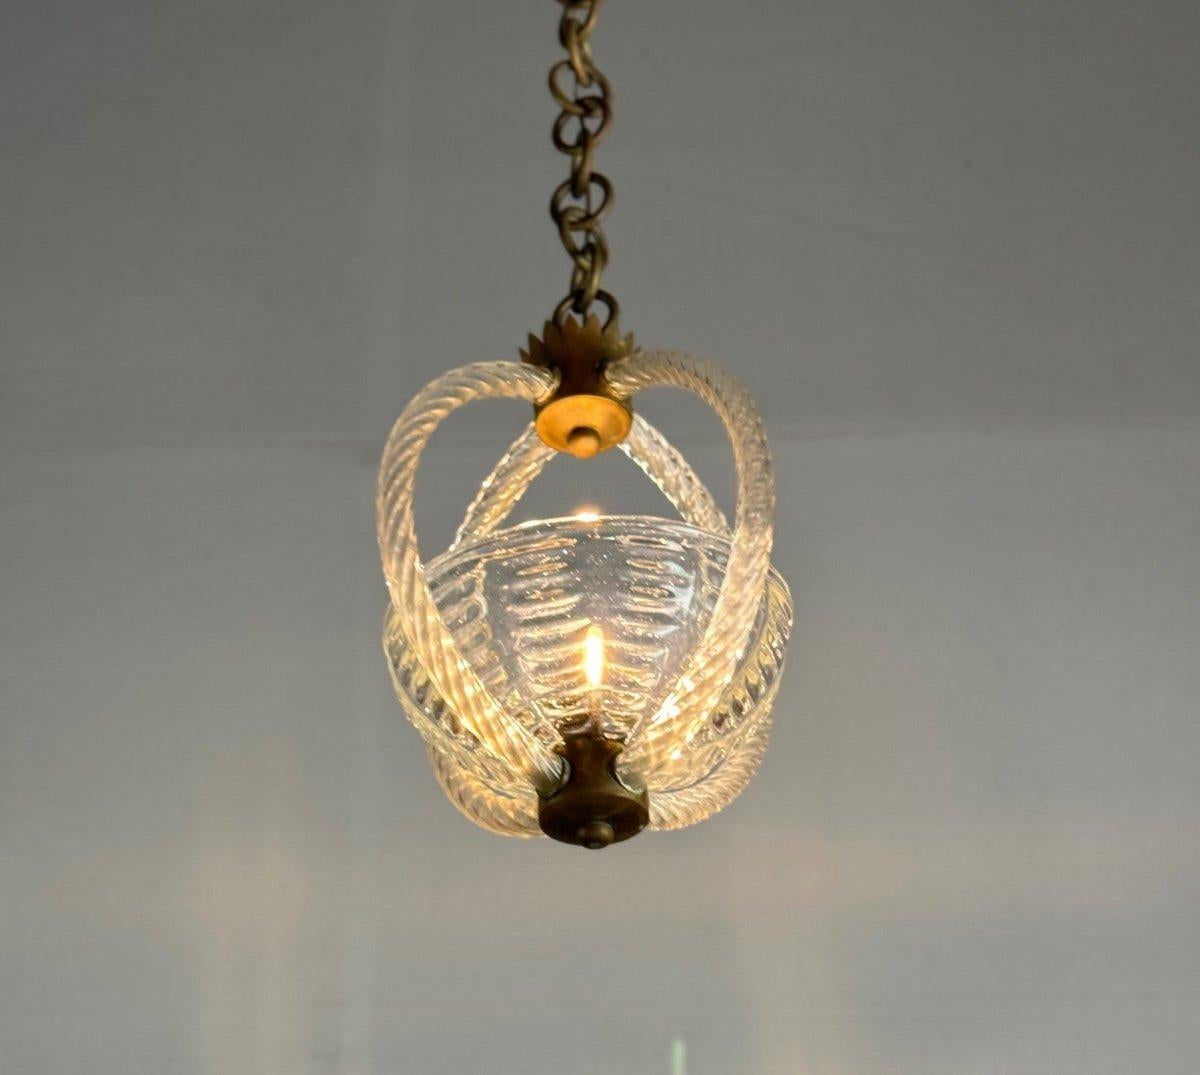 Venetian Chandelier In Colorless Murano Glass Circa 1950

40cm for the chandelier only, 90cm with the chain.